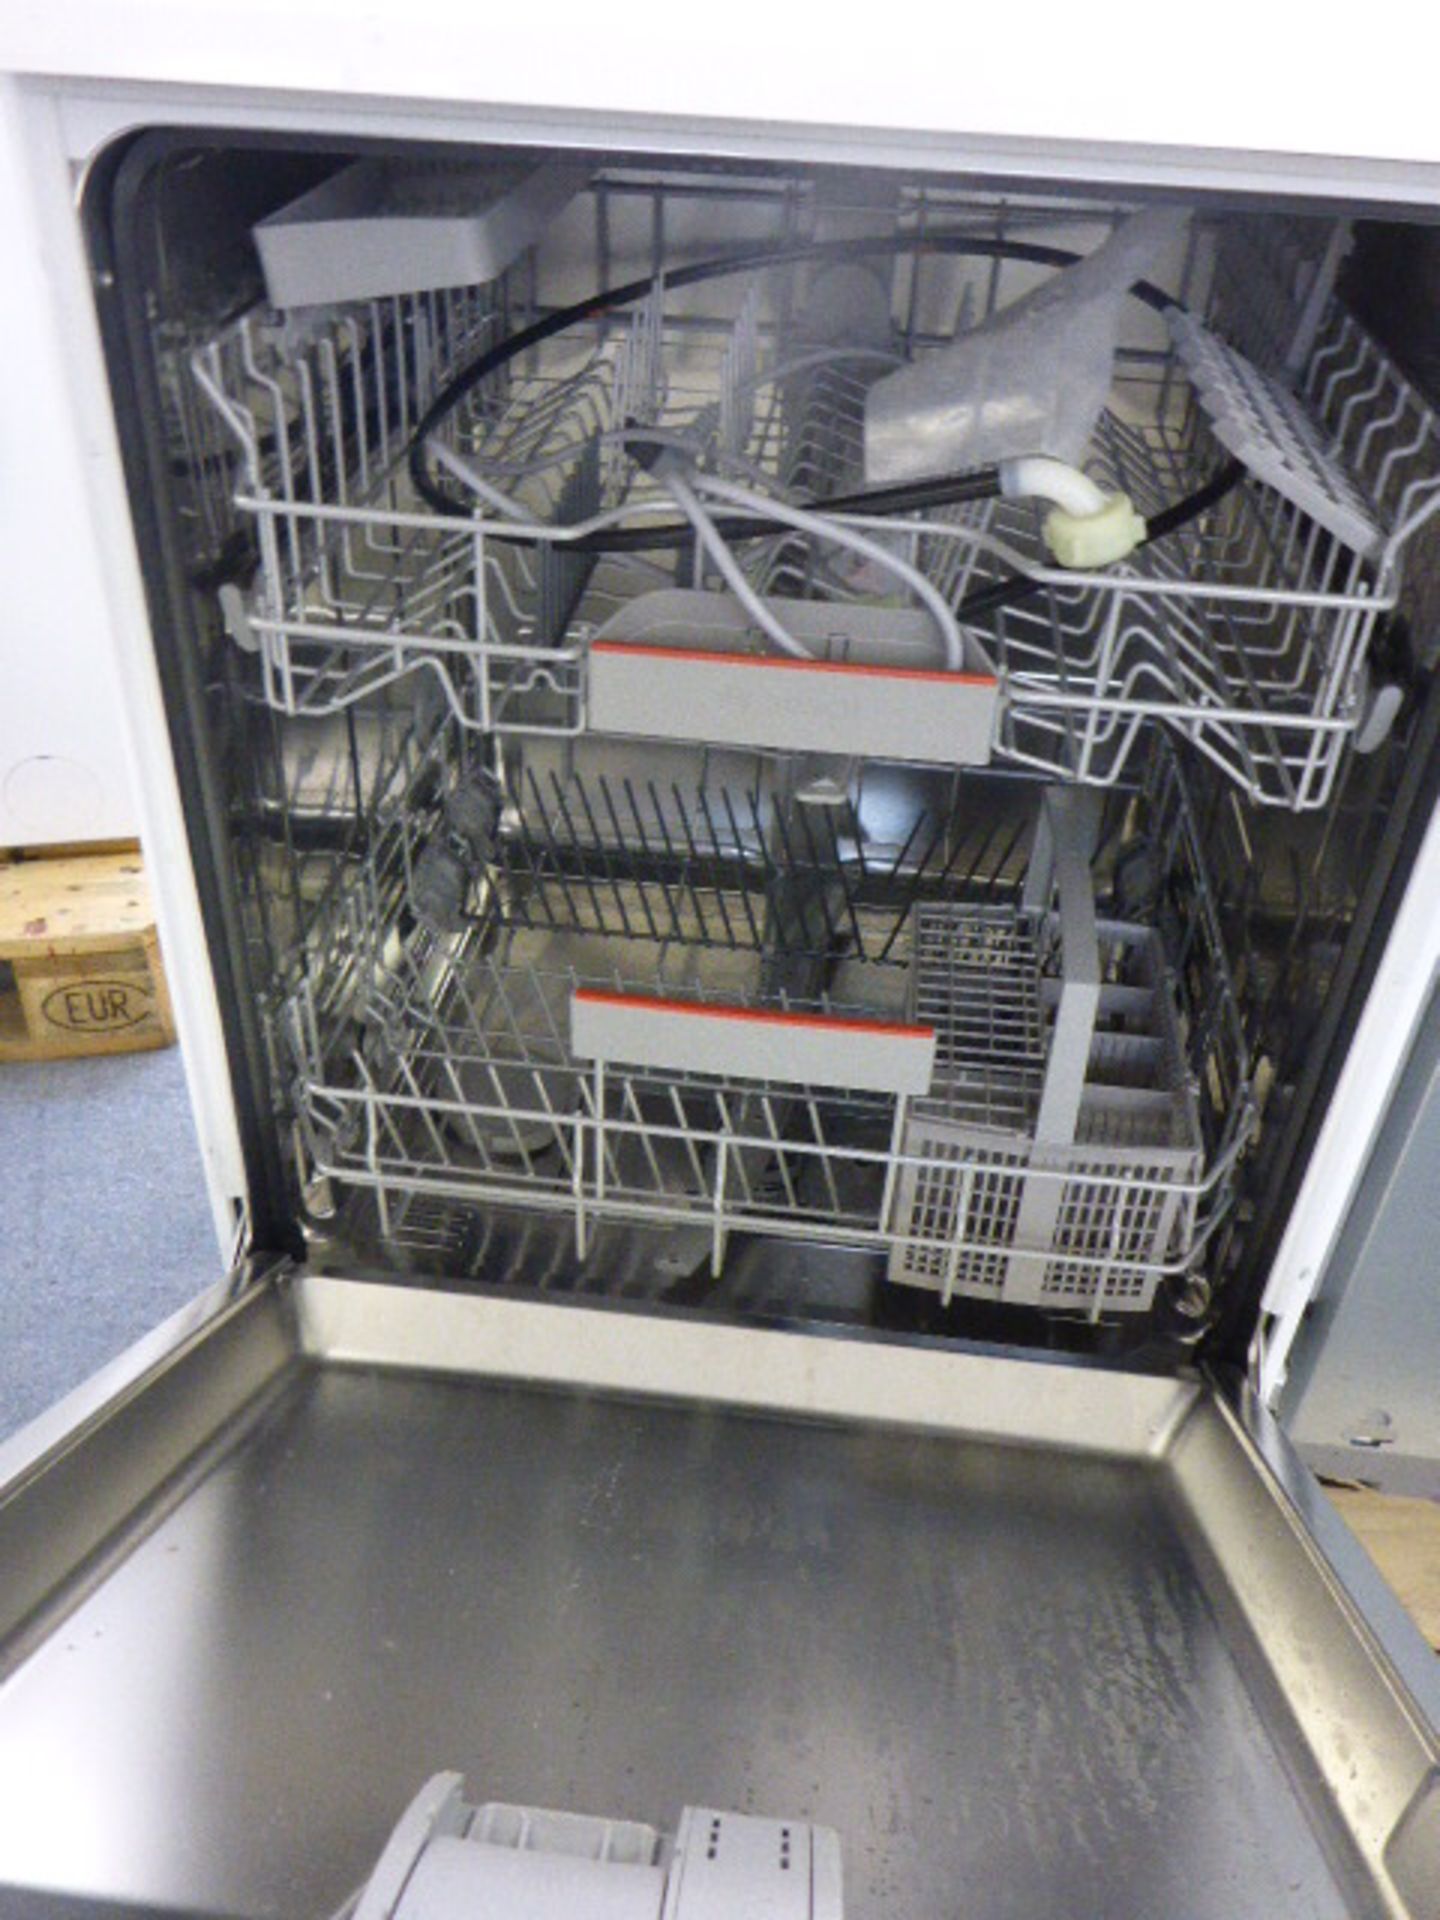 SMS46IW10GB Bosch Free-standing dishwasher - Image 2 of 2